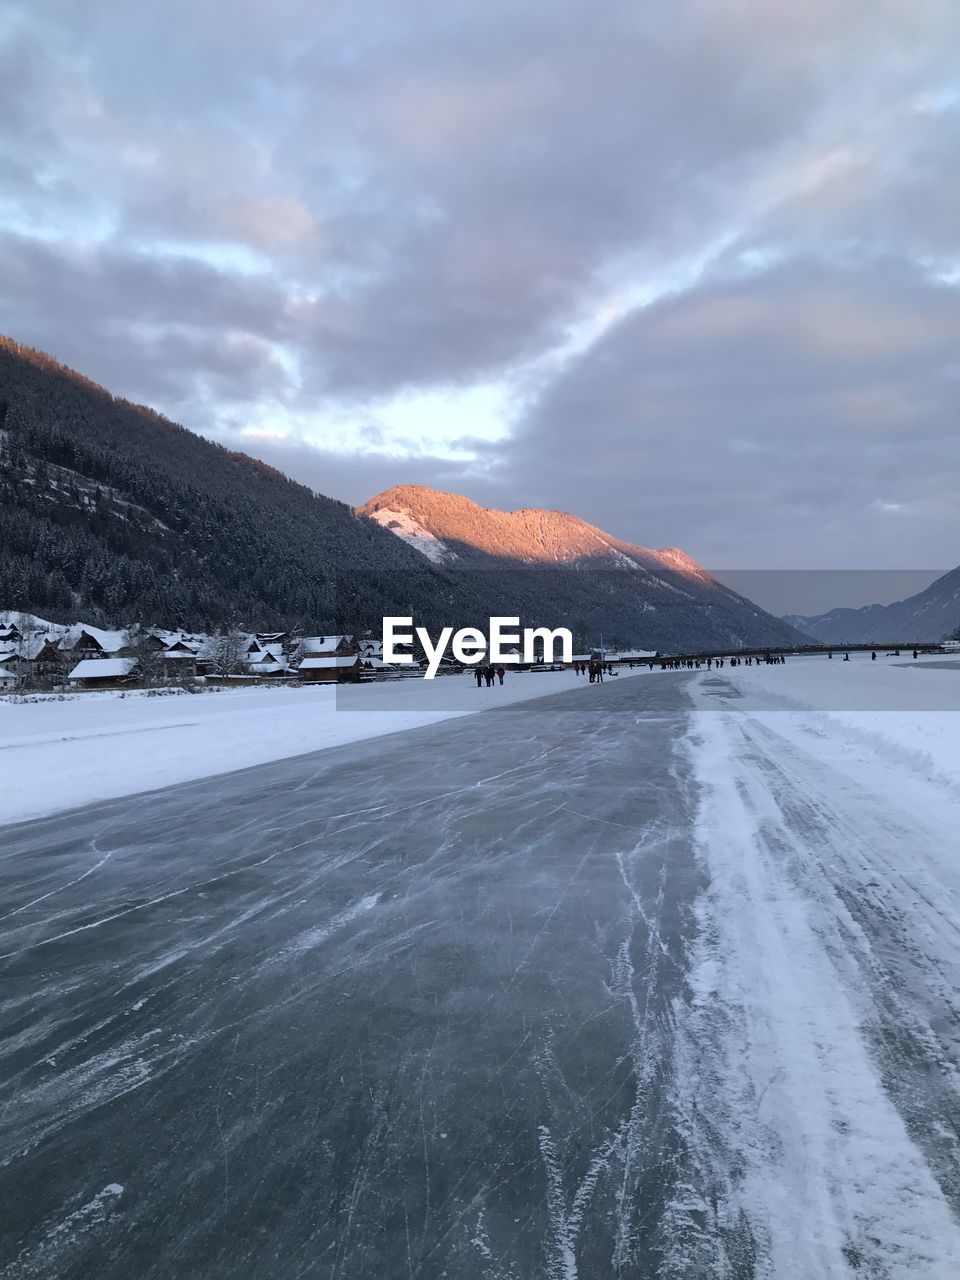 Scenic view of frozen lake